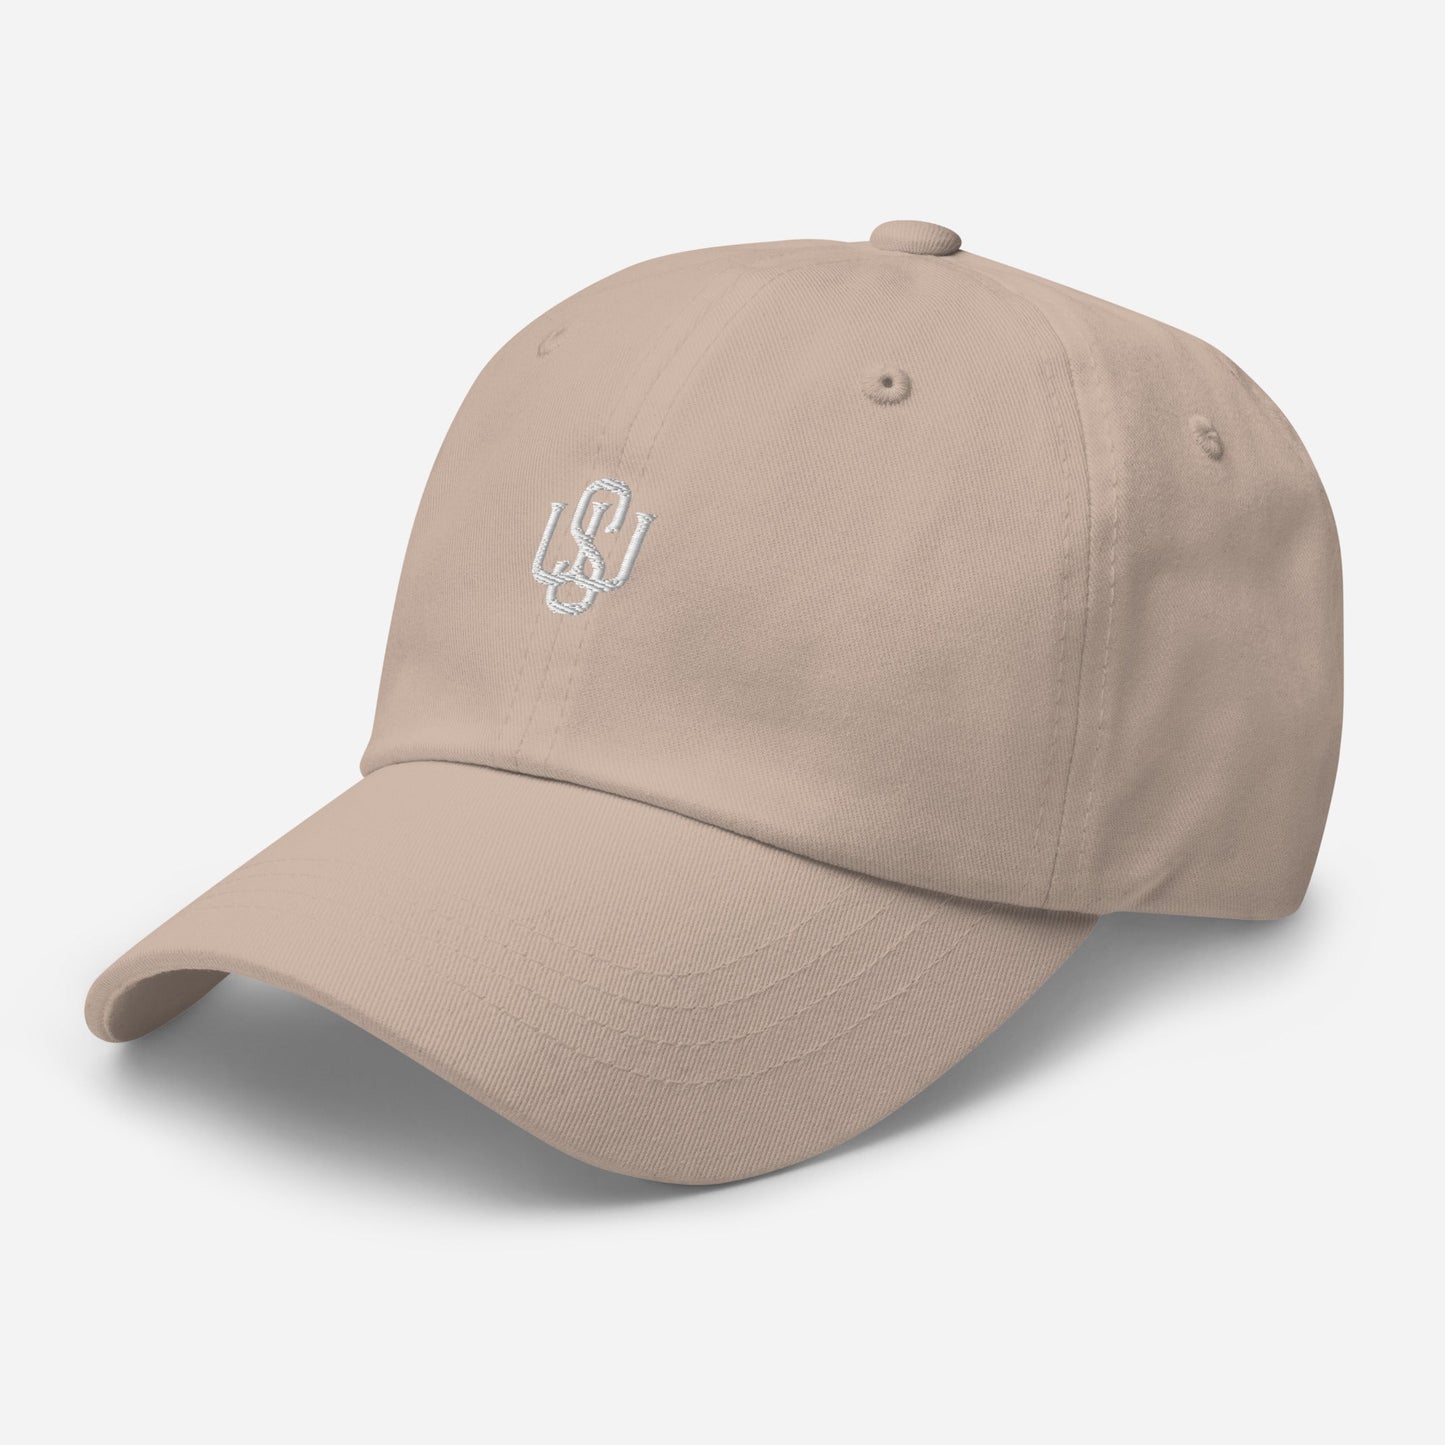 WS Embroidery hat - Wet Sundays